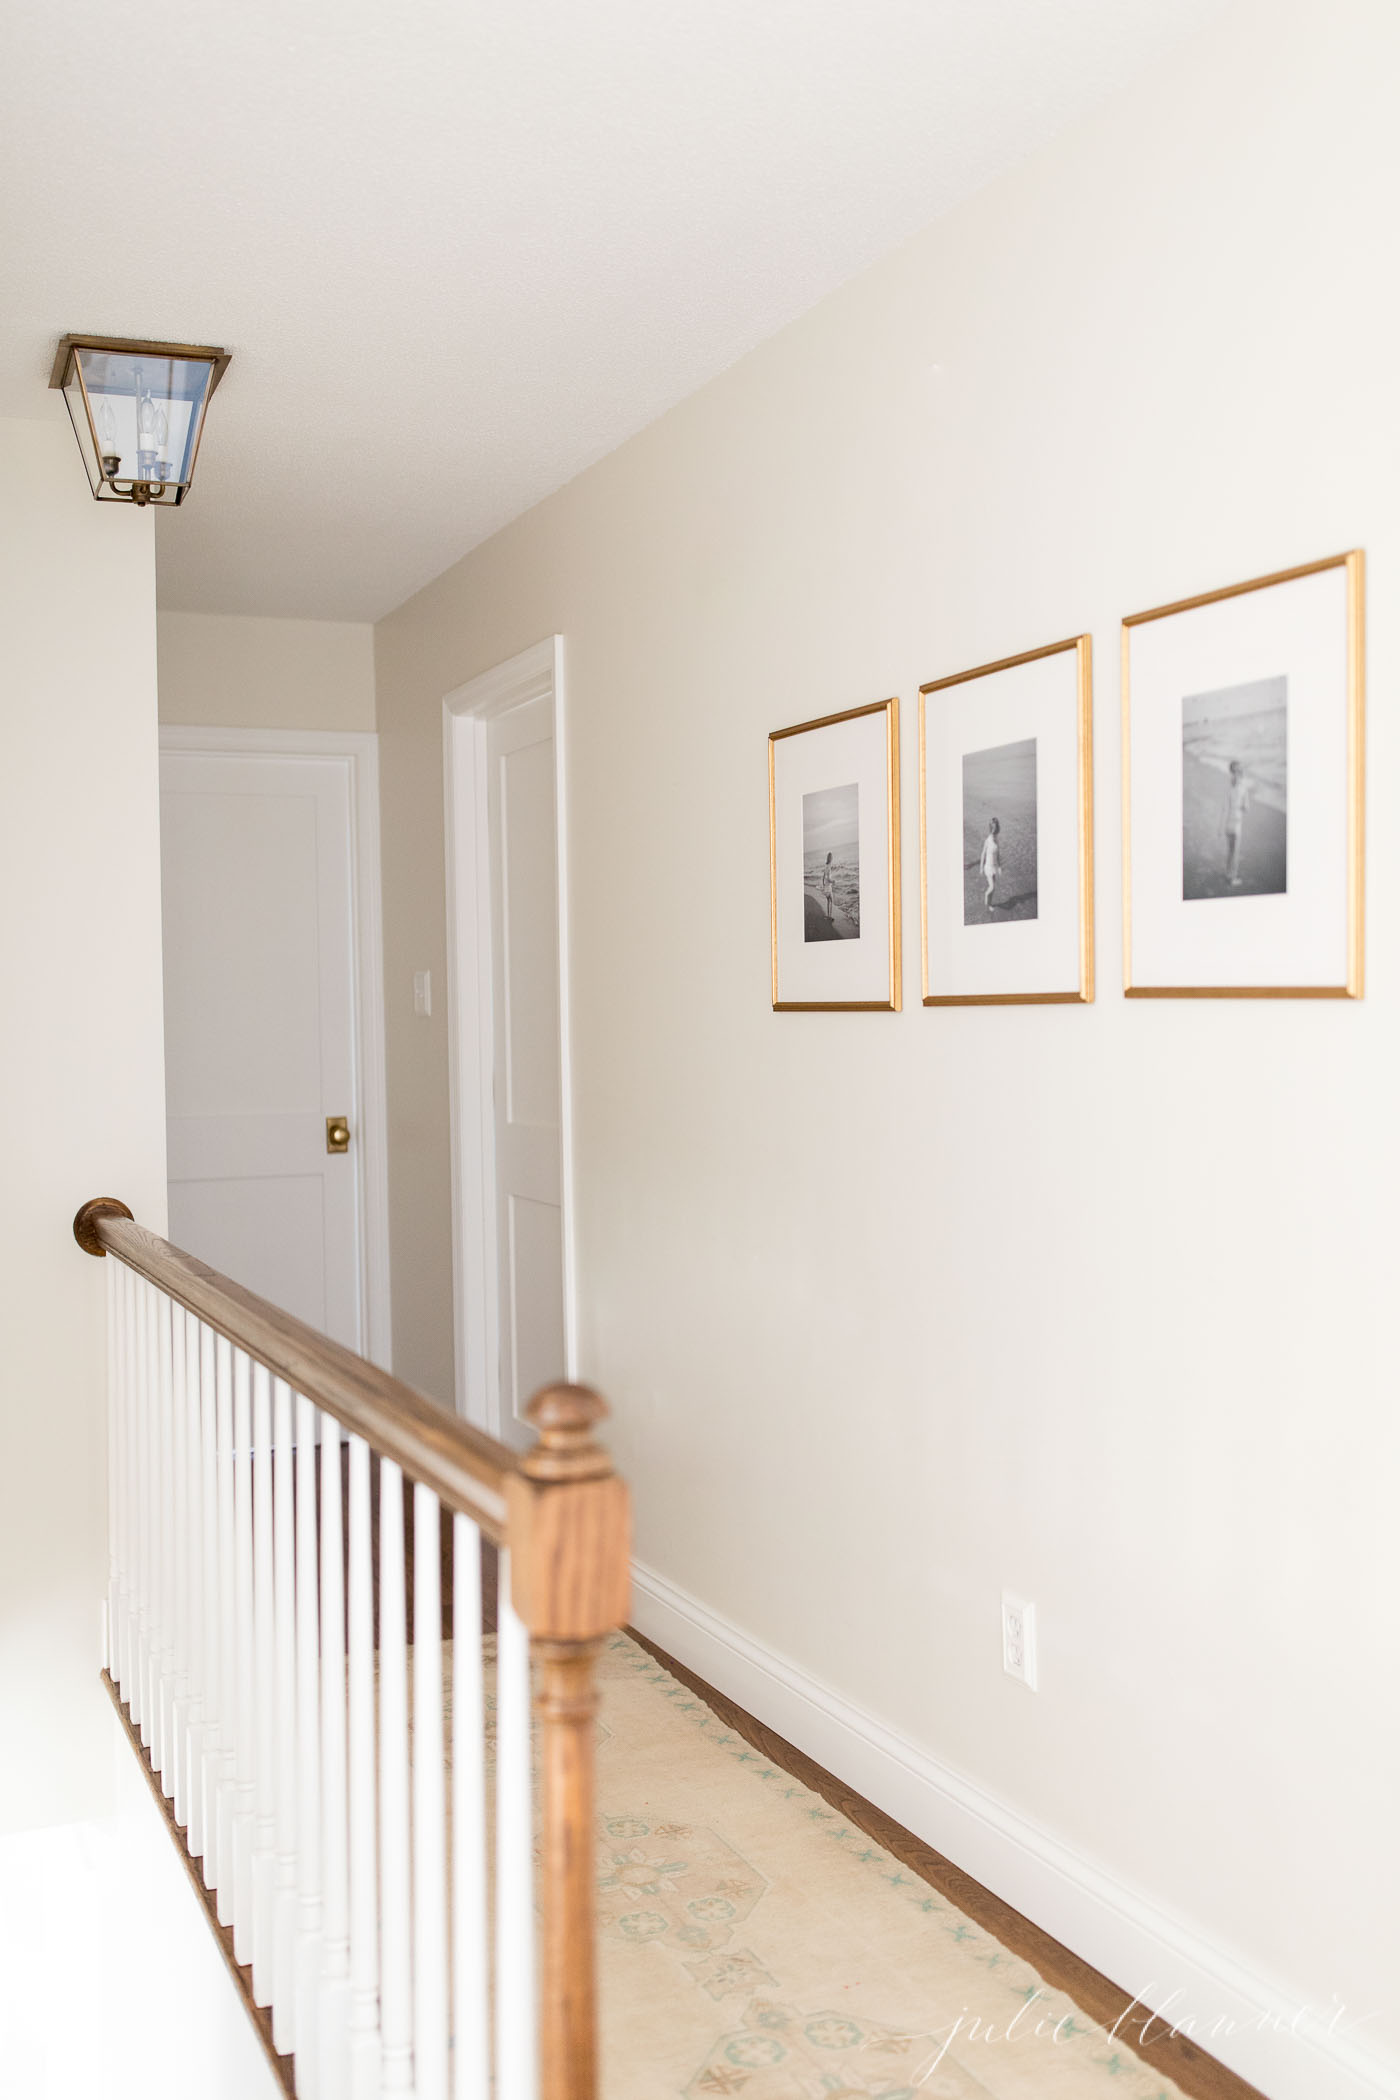 cream paint color walls in a hallway